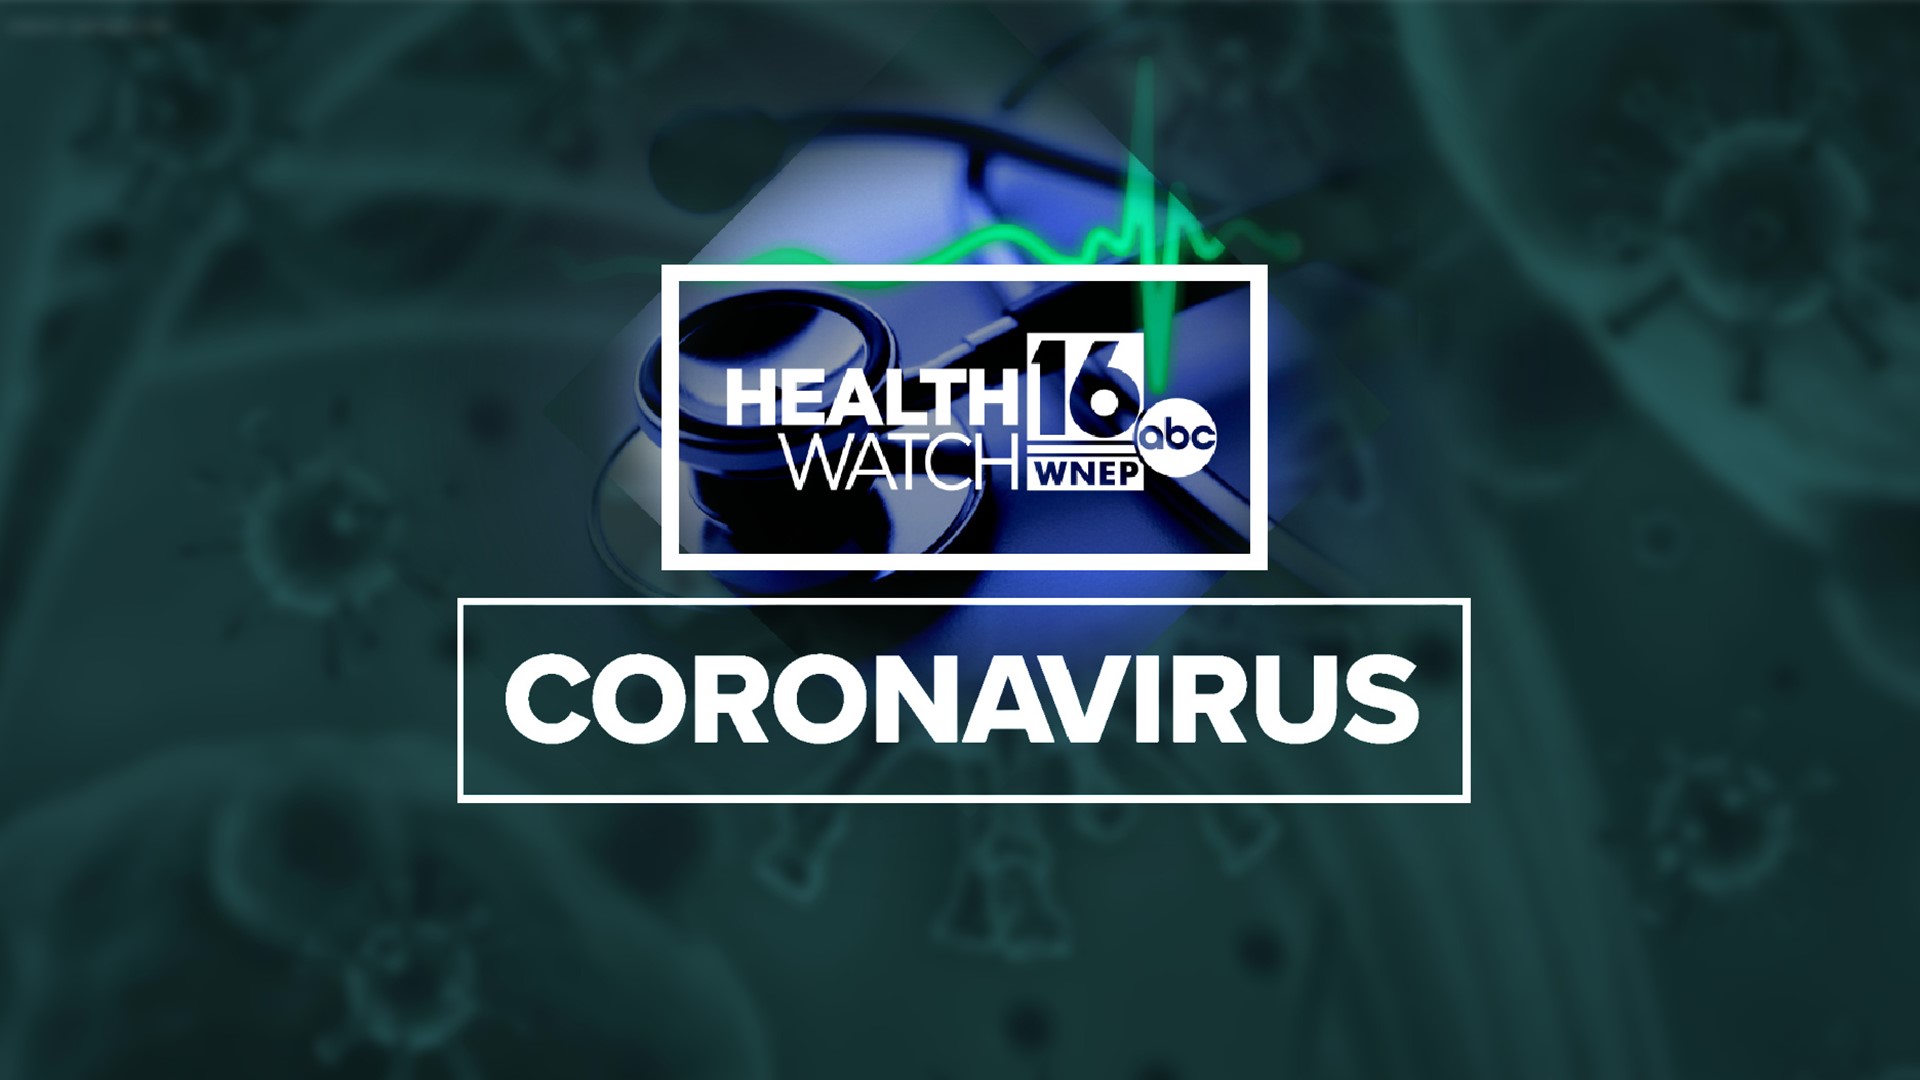 We took some of your questions about coronavirus variants or mutations in the genome of the virus to an expert at Geisinger.